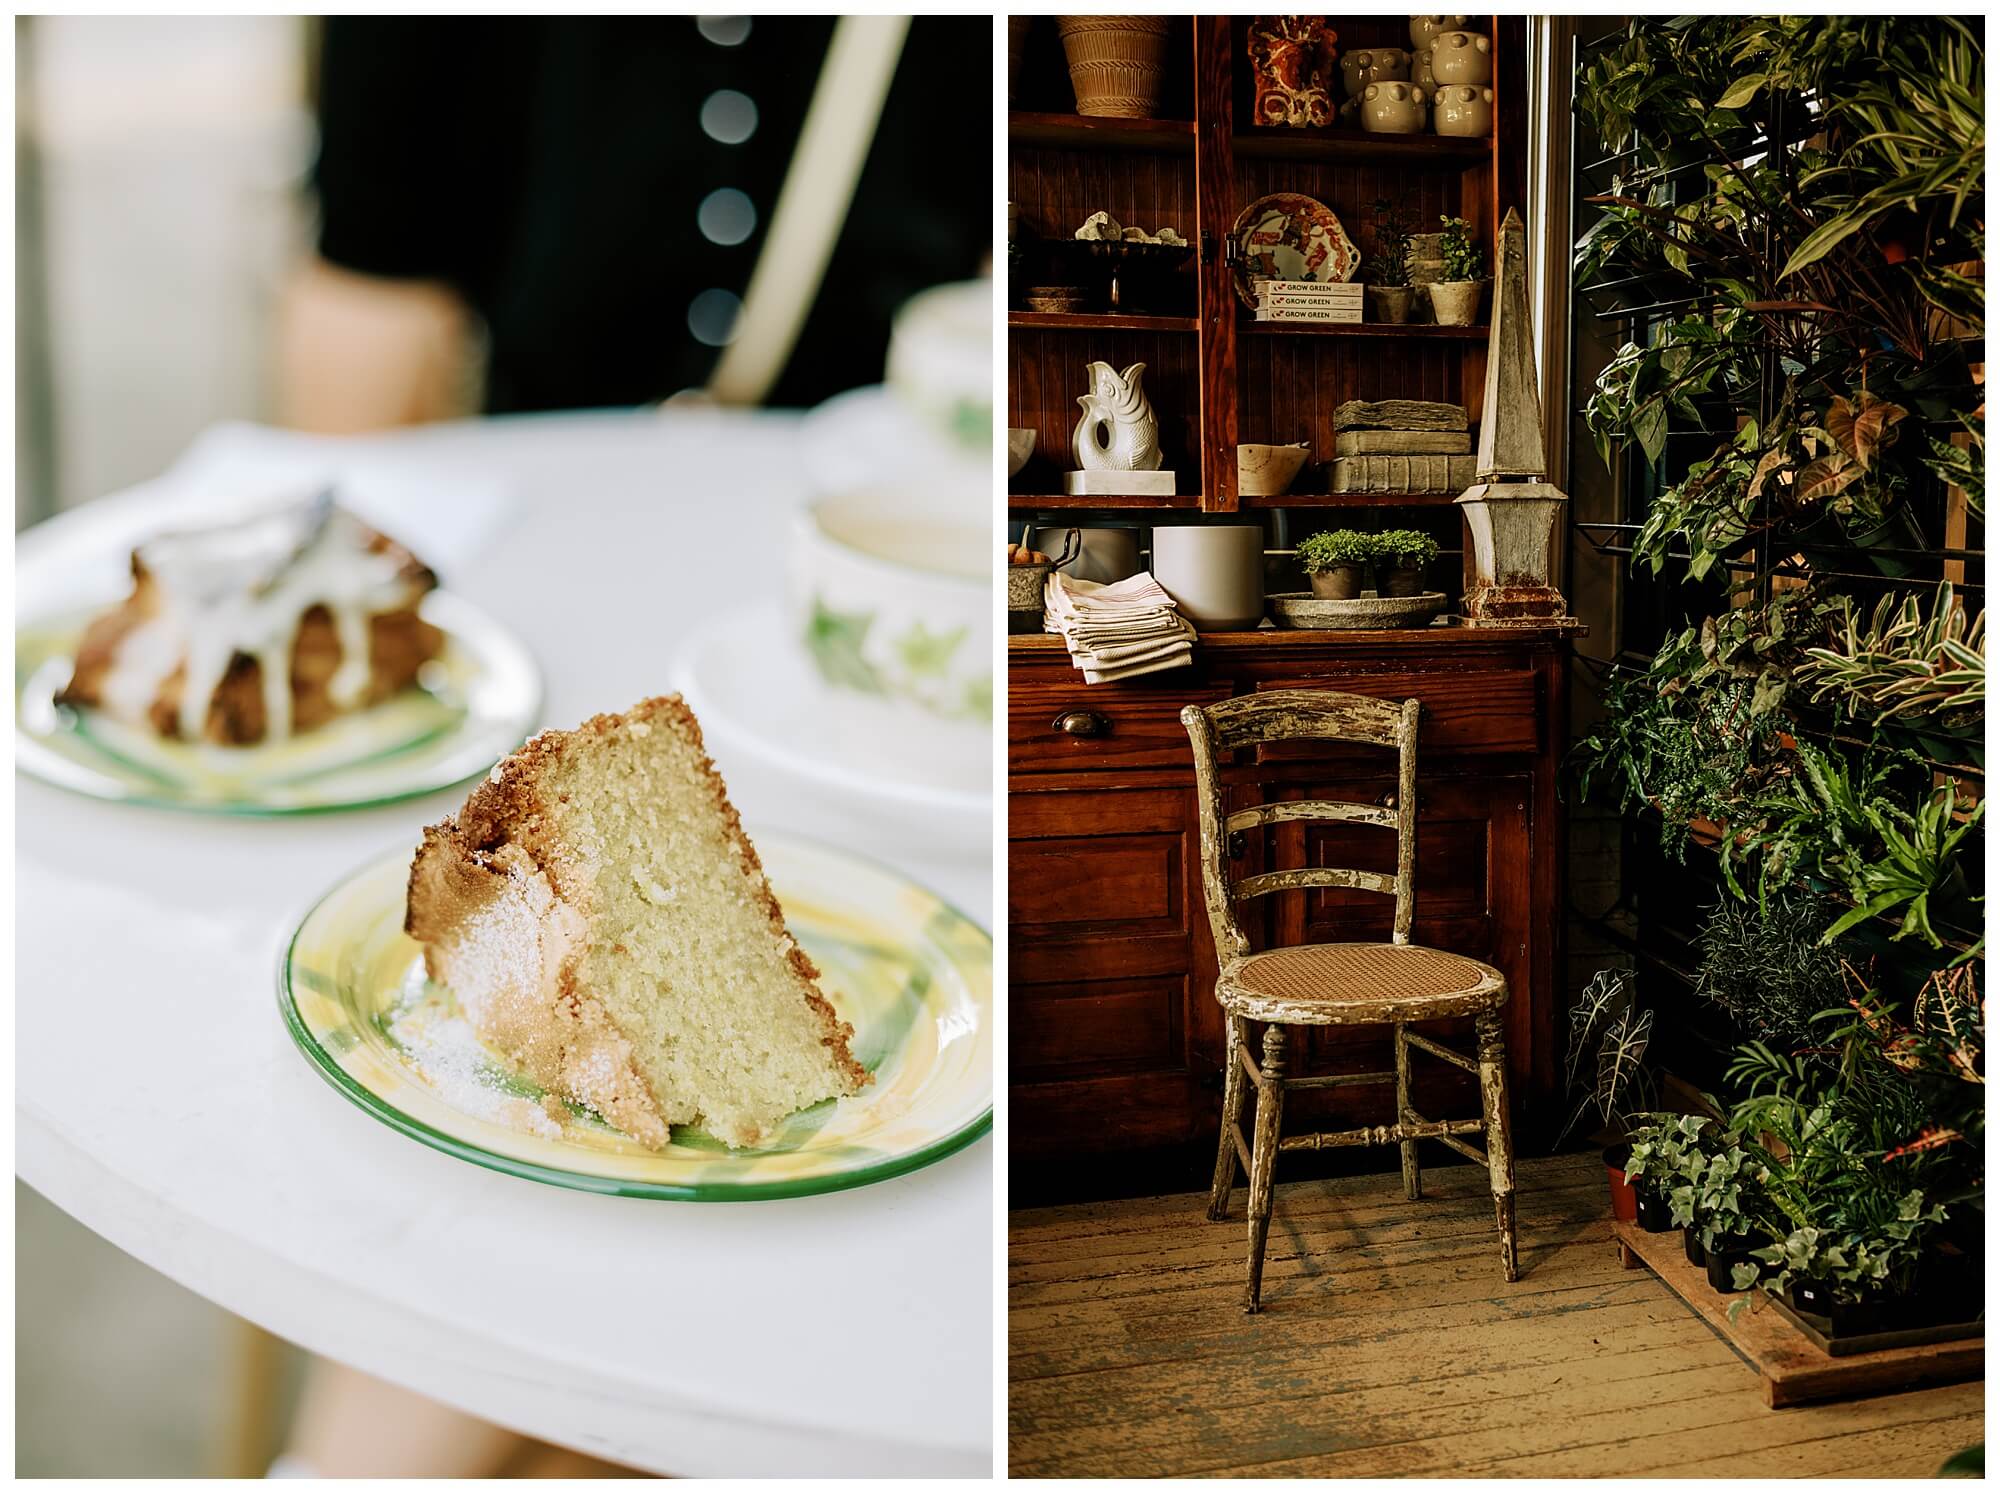 Left: olive oil cake at General Birmingham Right: Wall of plants at Shoppe Birmingham